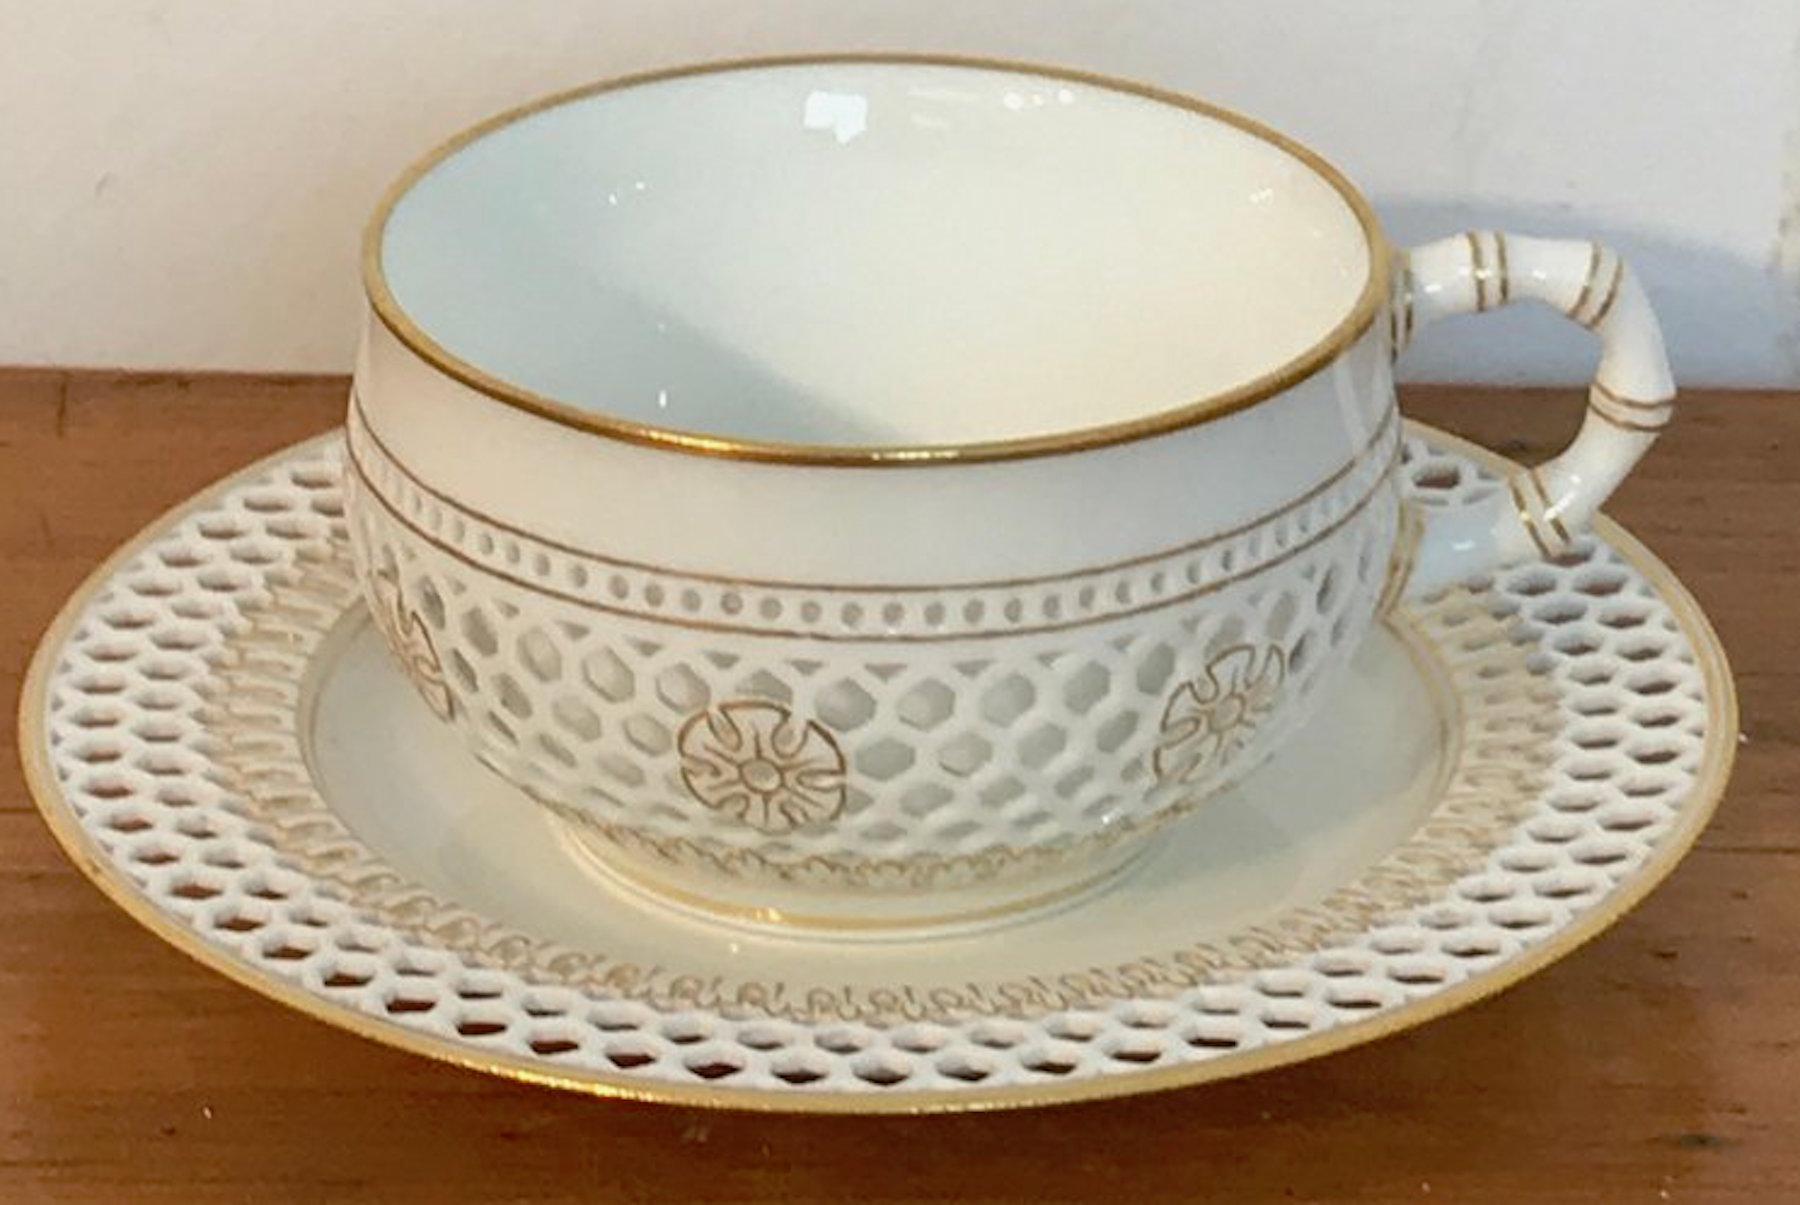 19th century Sevres reticulated cup and saucer, the double walled cup made in 1881, with 